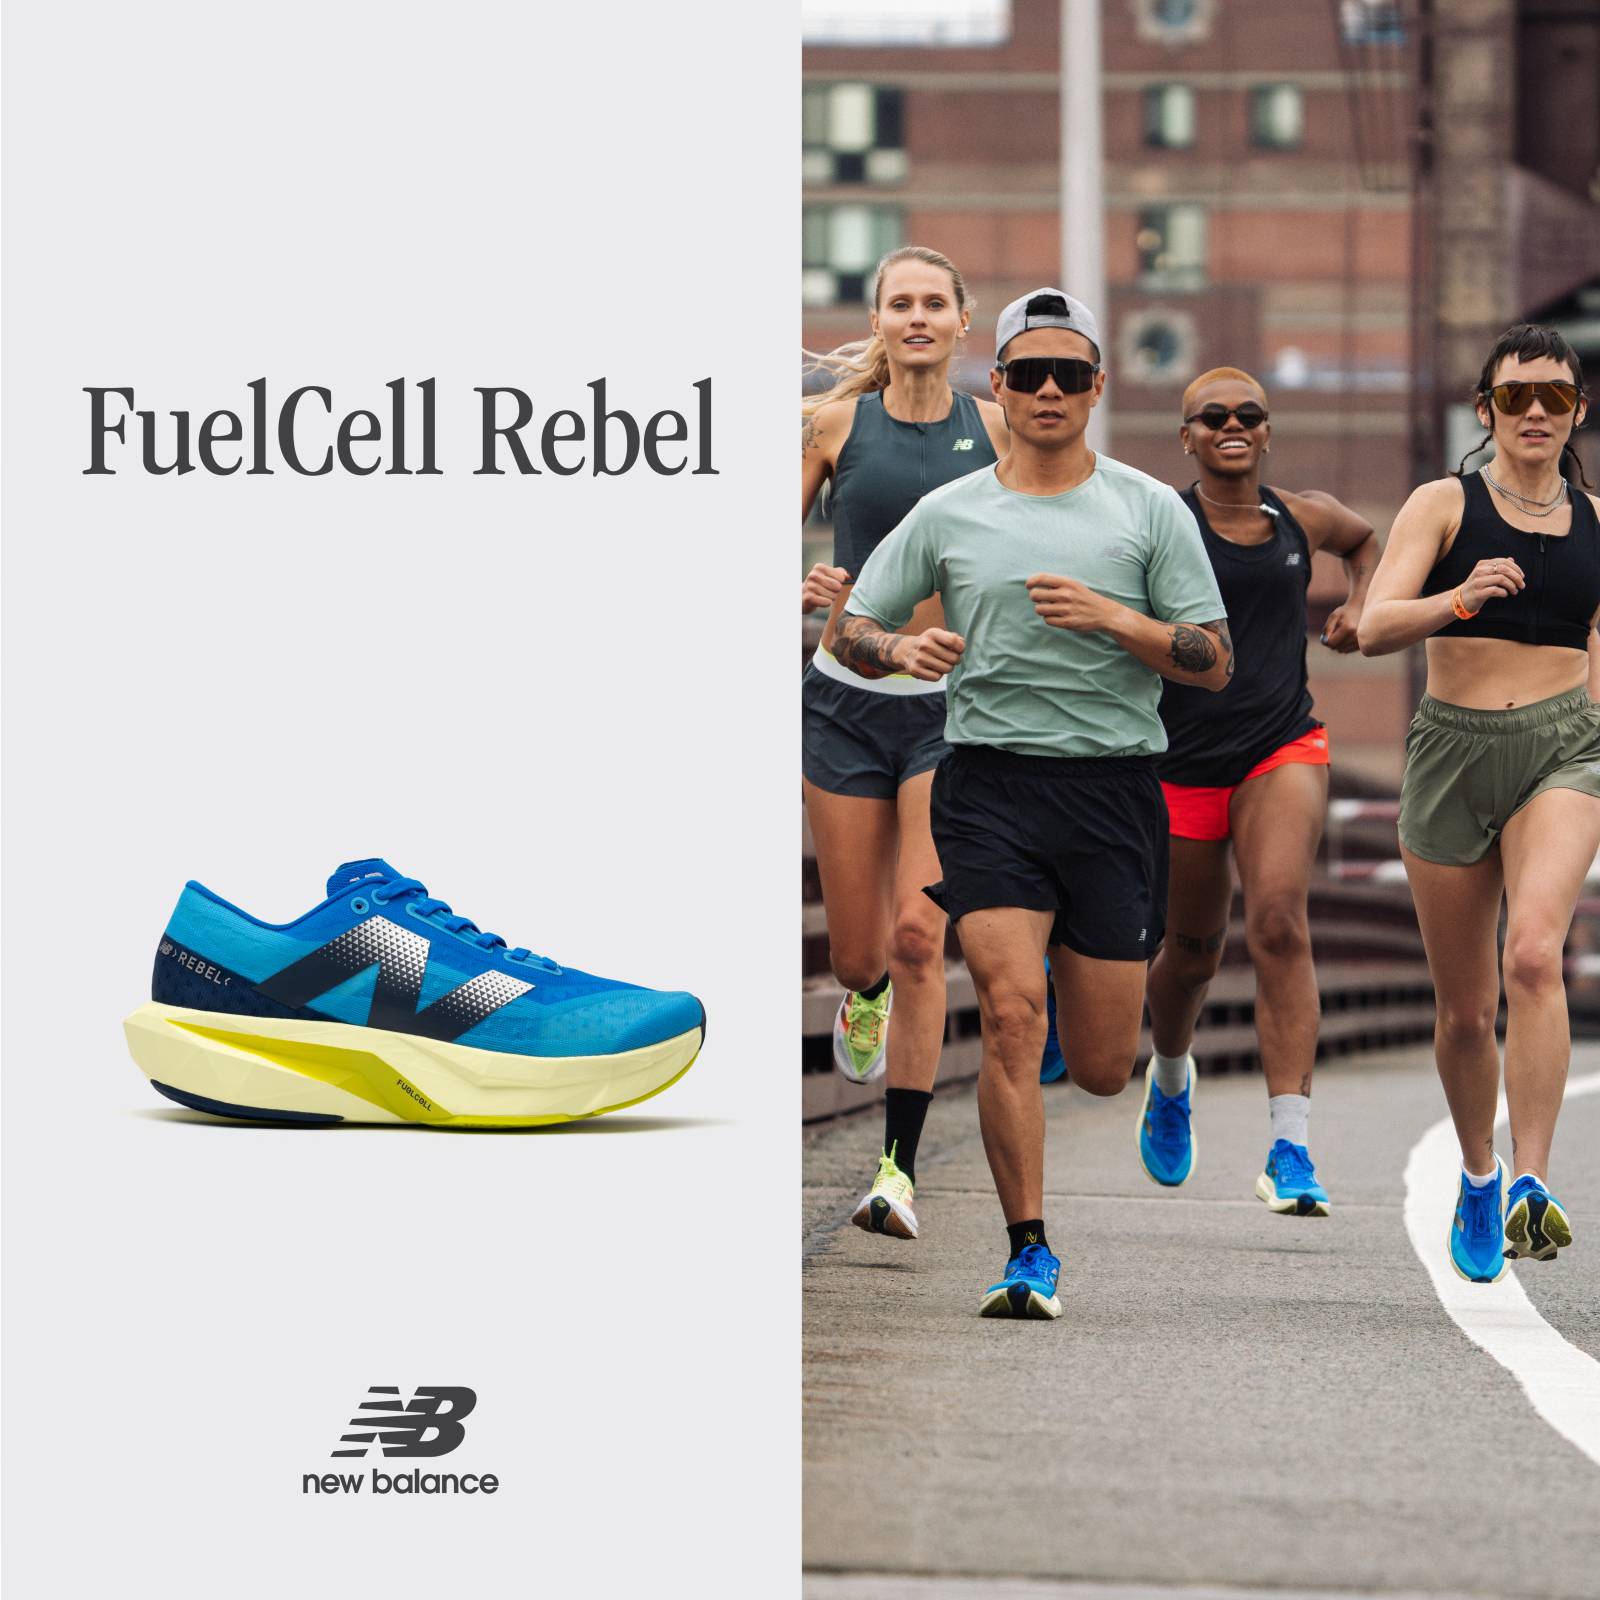 Bring an element of fun into your run